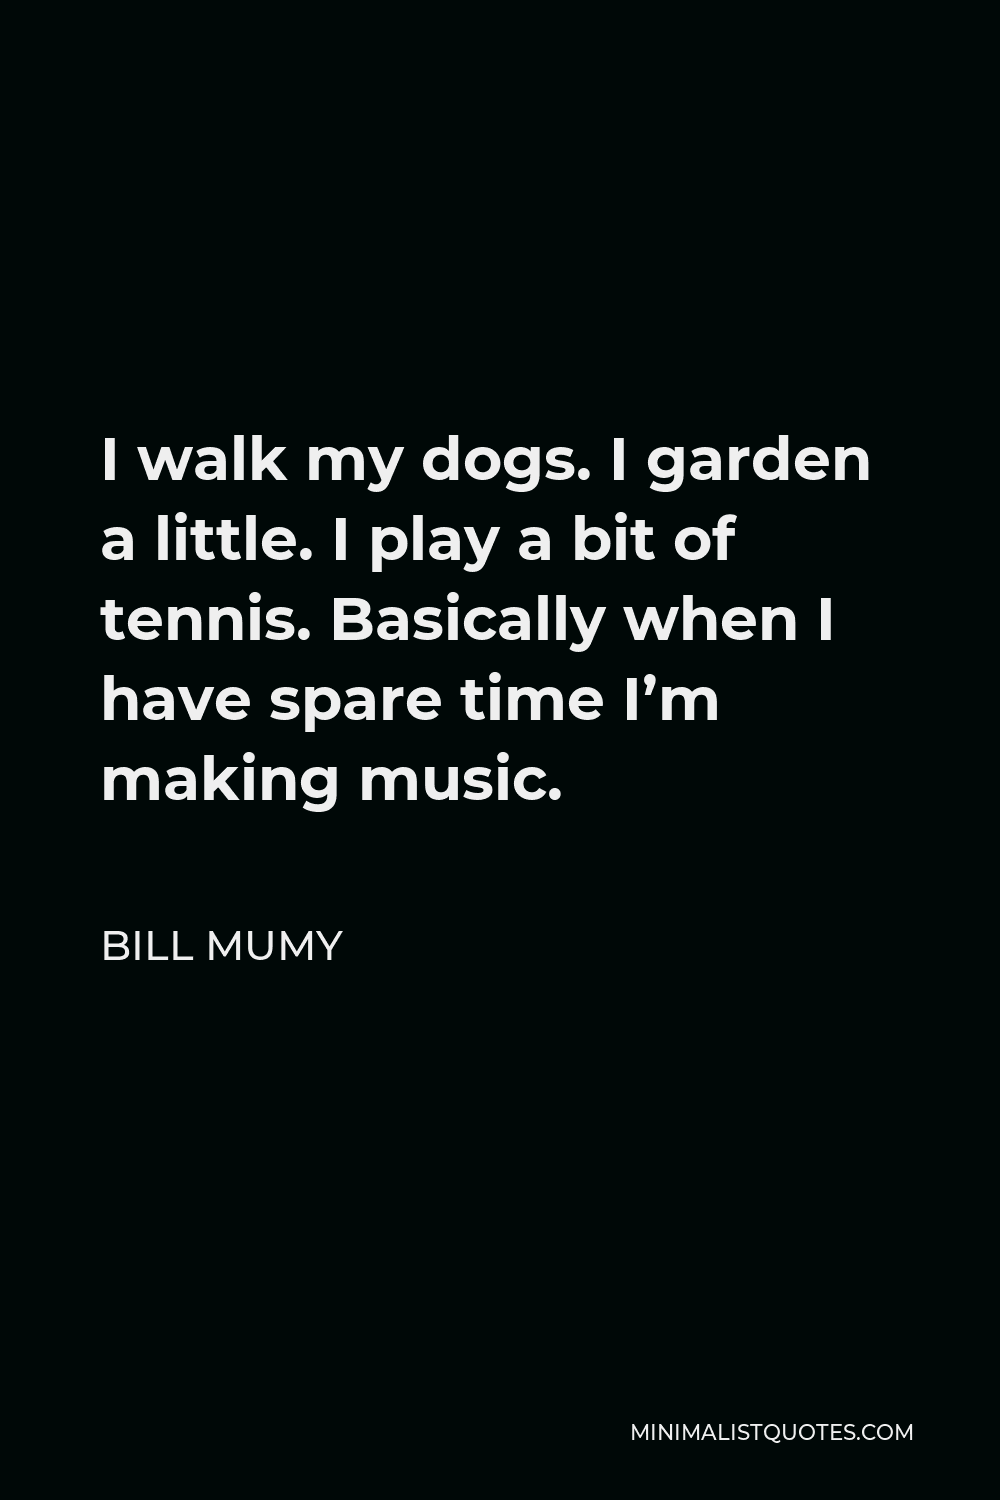 Bill Mumy Quote - I walk my dogs. I garden a little. I play a bit of tennis. Basically when I have spare time I’m making music.